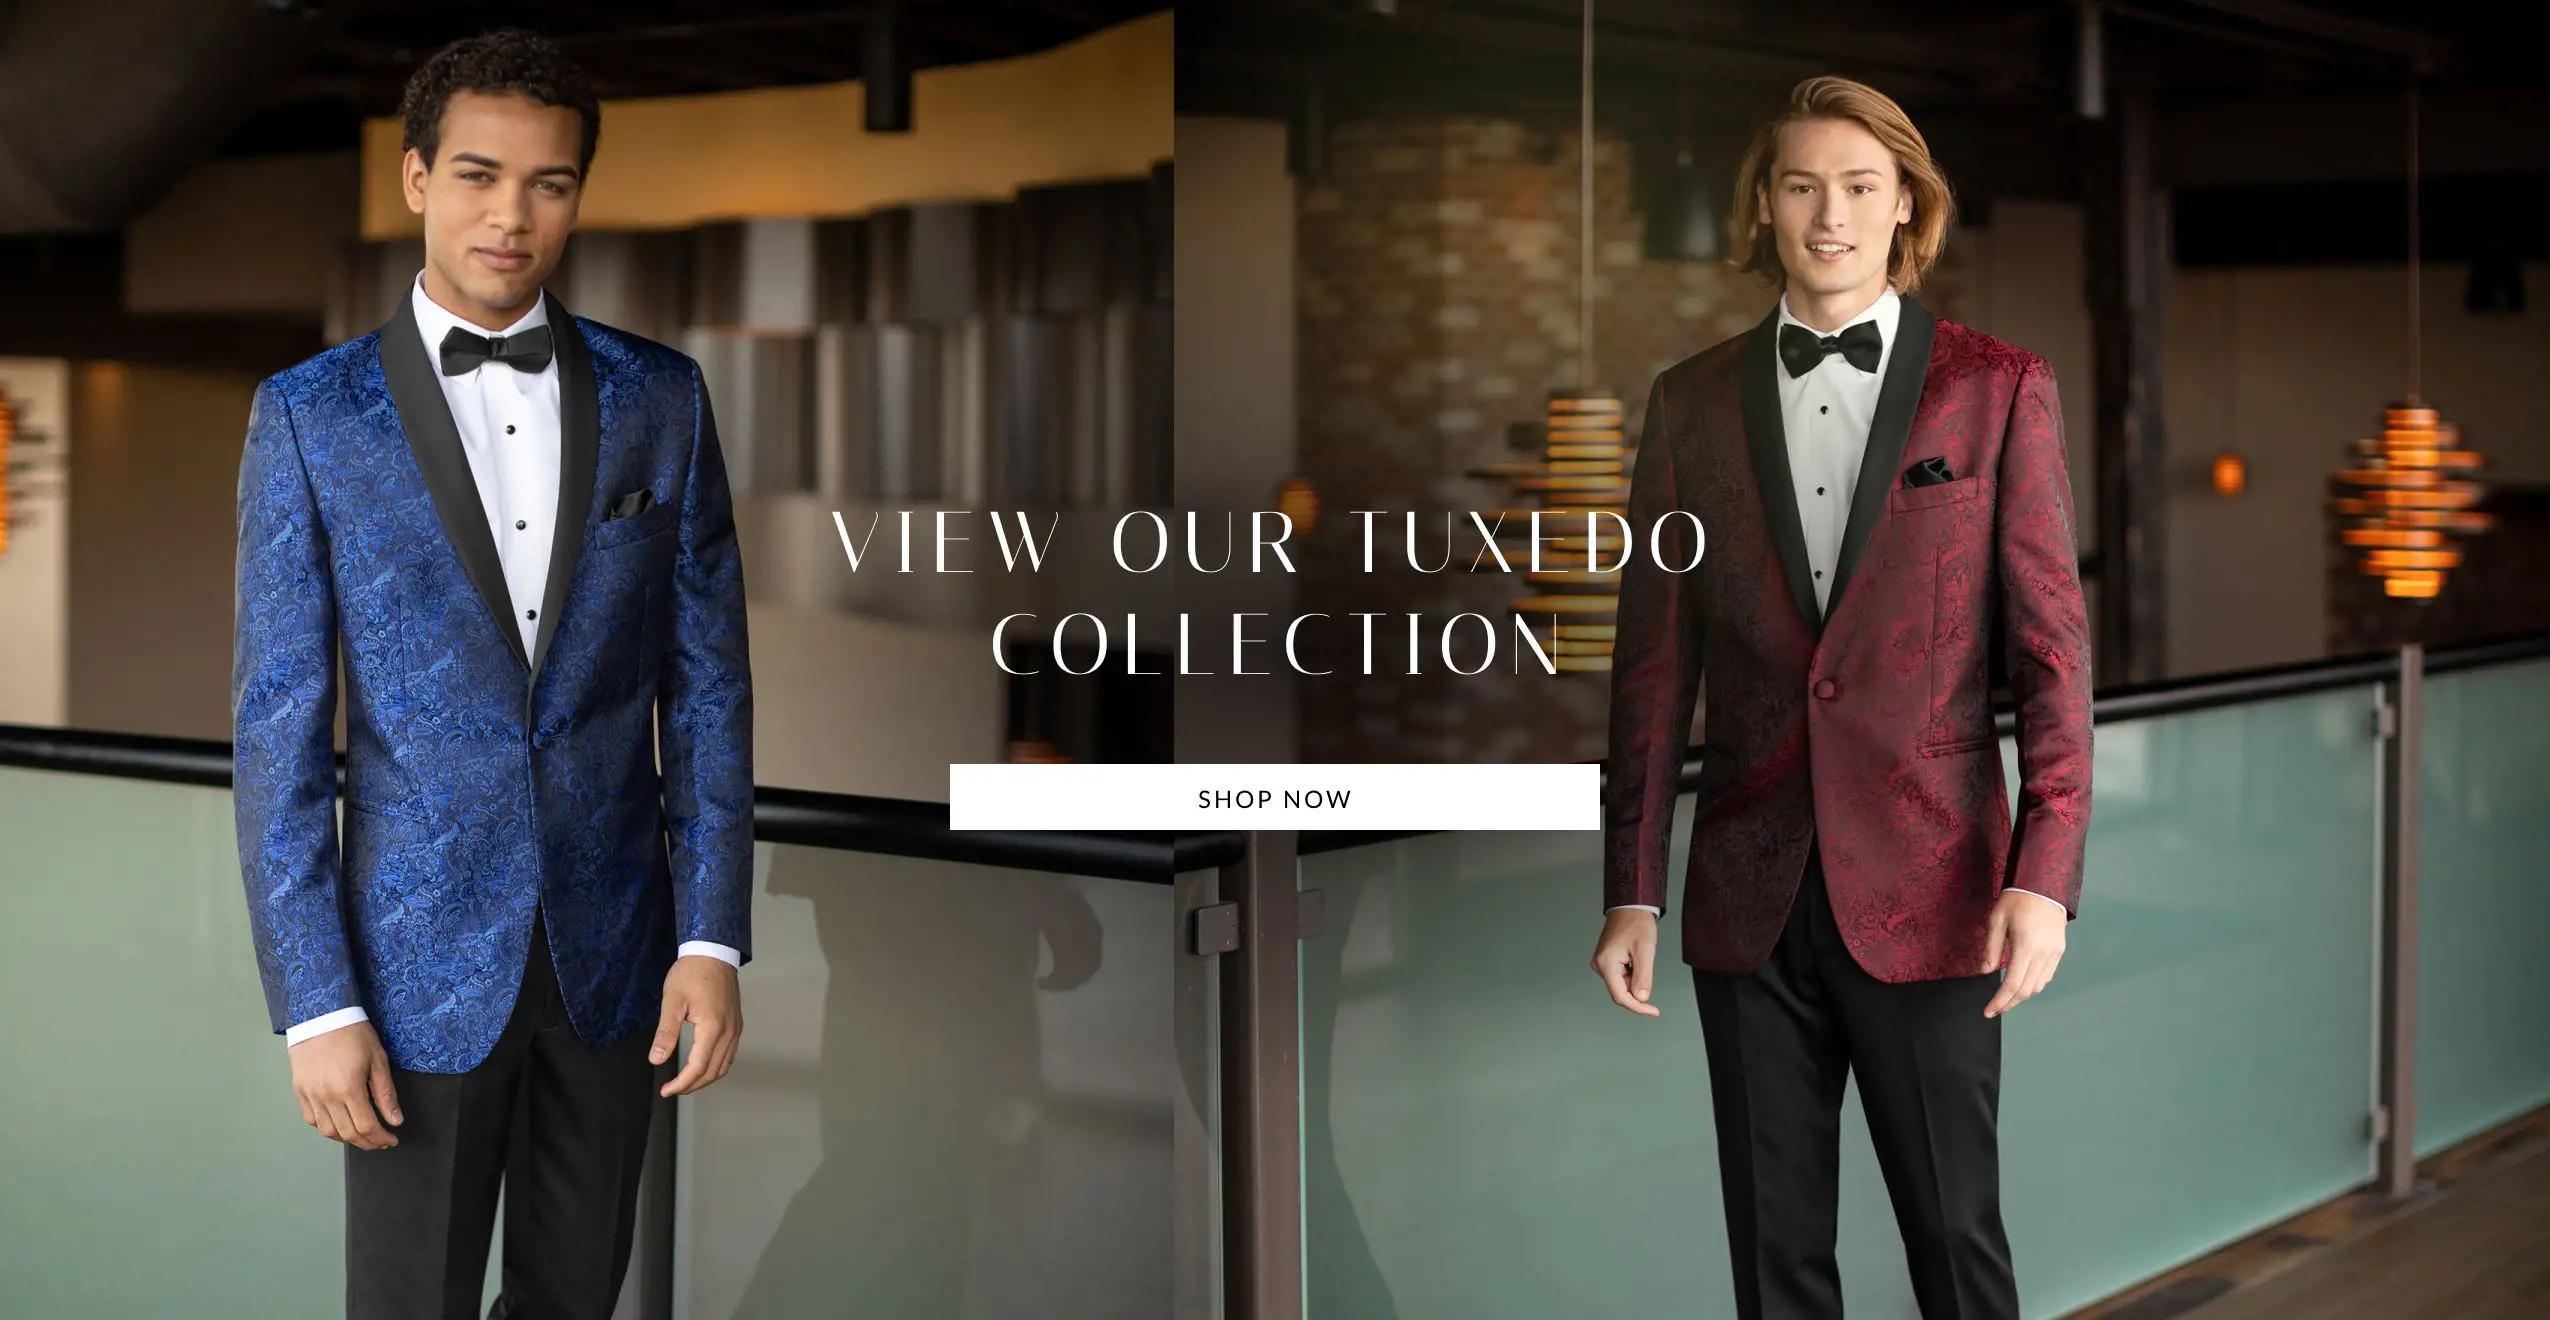 Banner Promoting Tuxedos